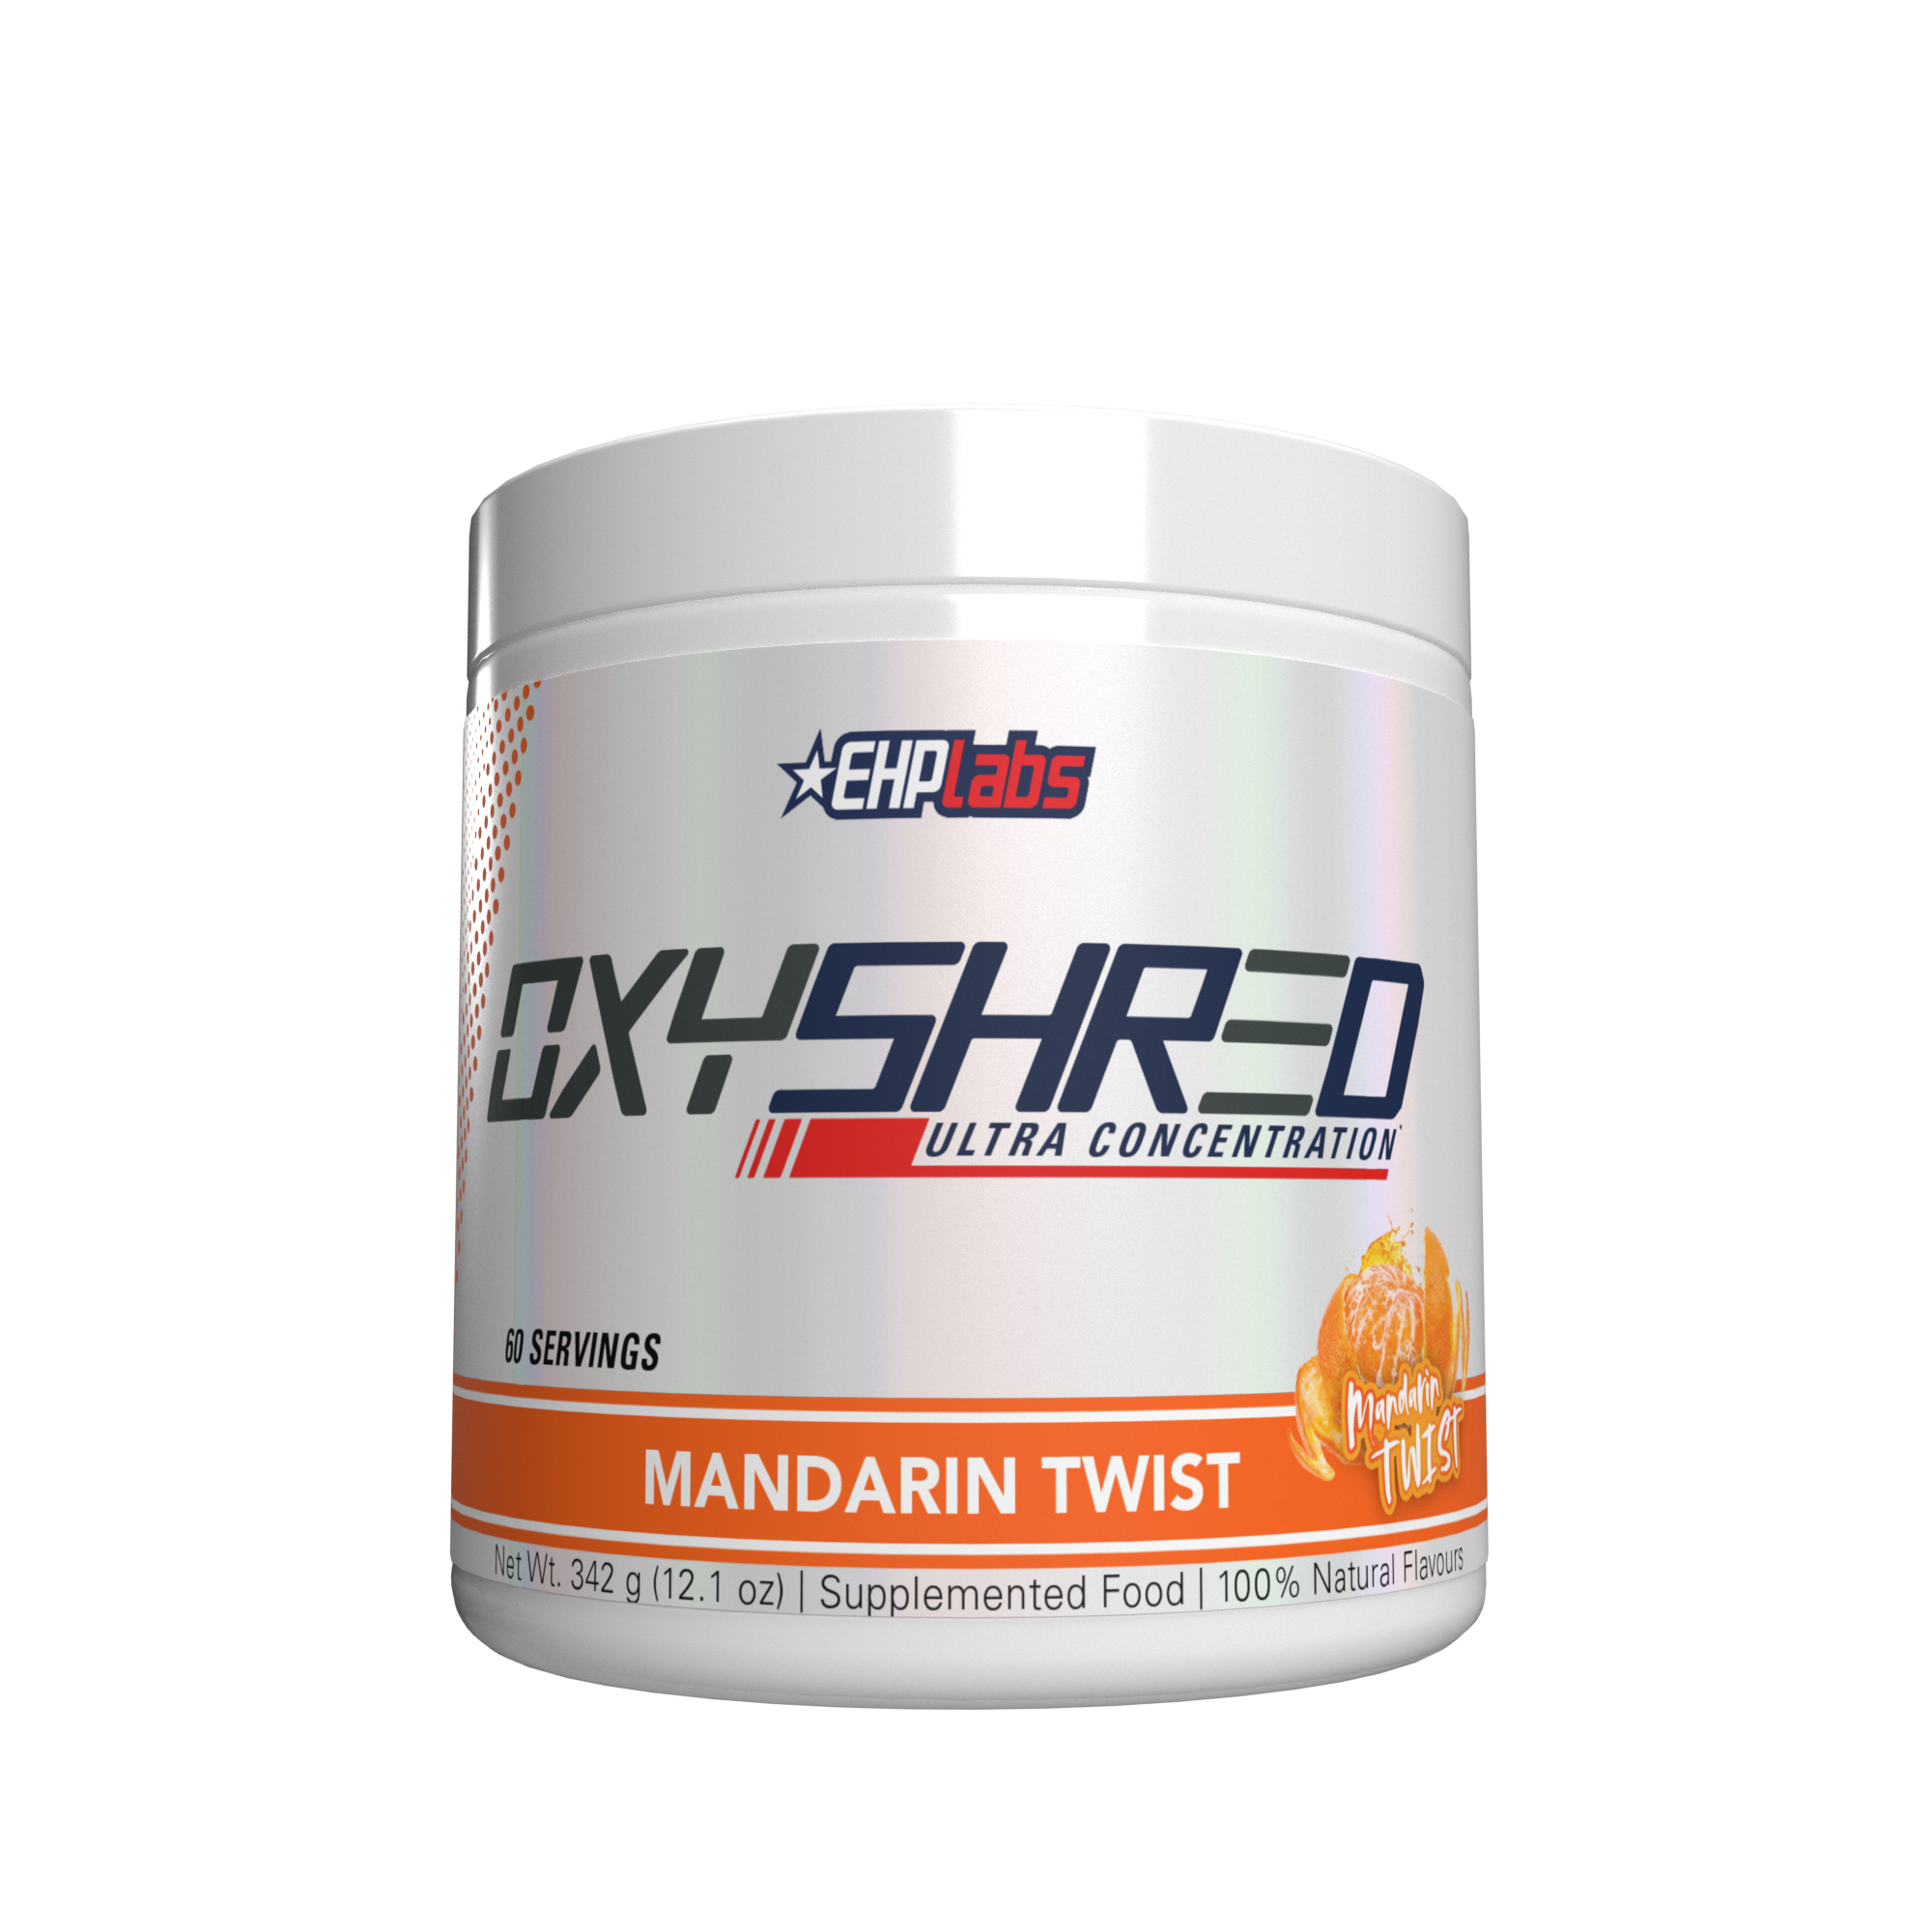 EHP Labs Oxyshred Thermogenic